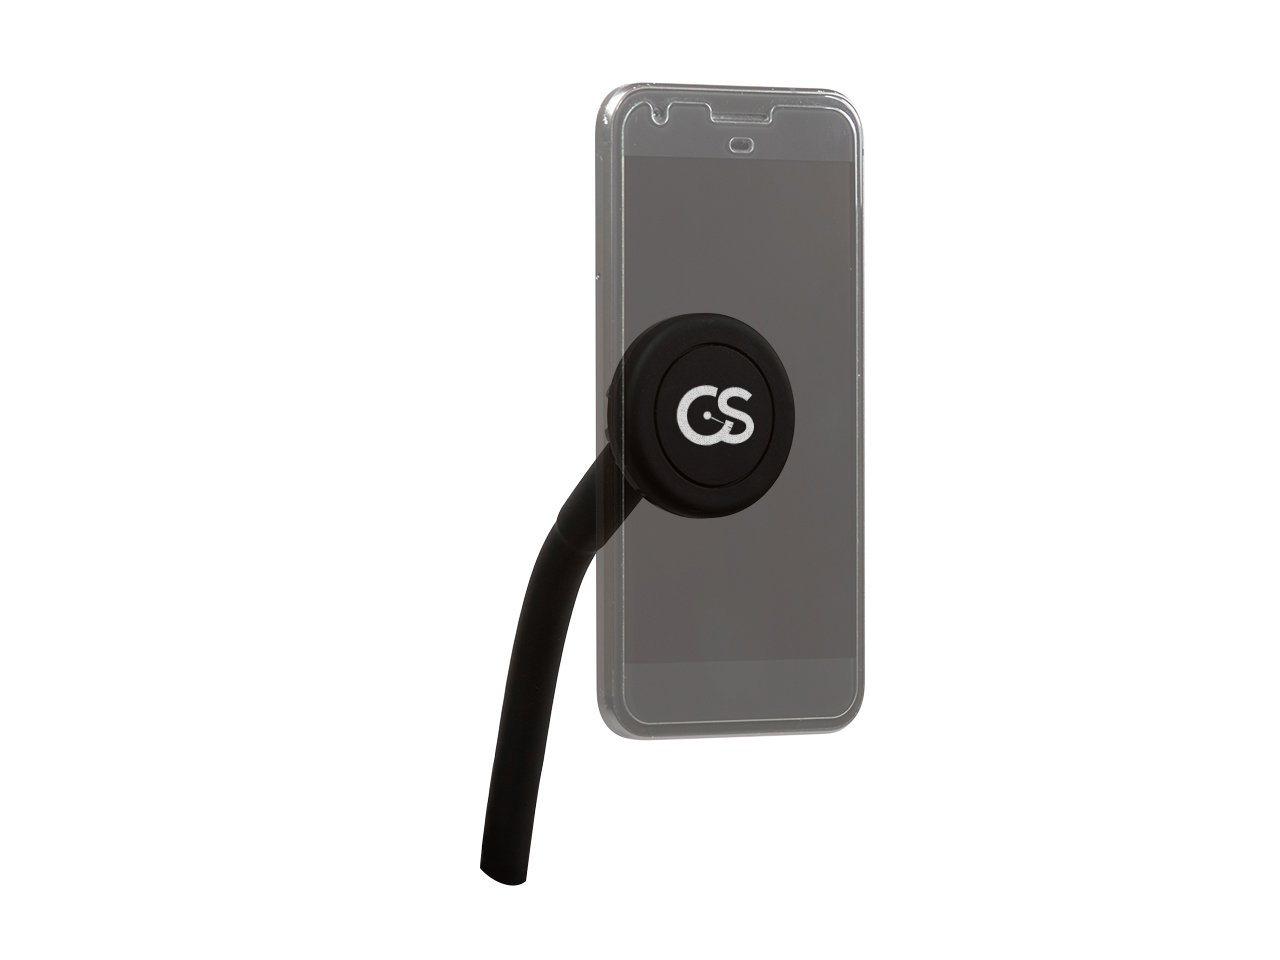 https://cdn11.bigcommerce.com/s-351ed/images/stencil/{:size}/products/11879/66683/the_gemini_phone_mount_for_fiat_500_-_magsafe_3EE2J5V_11879__49282.1681254796.jpg?c=2